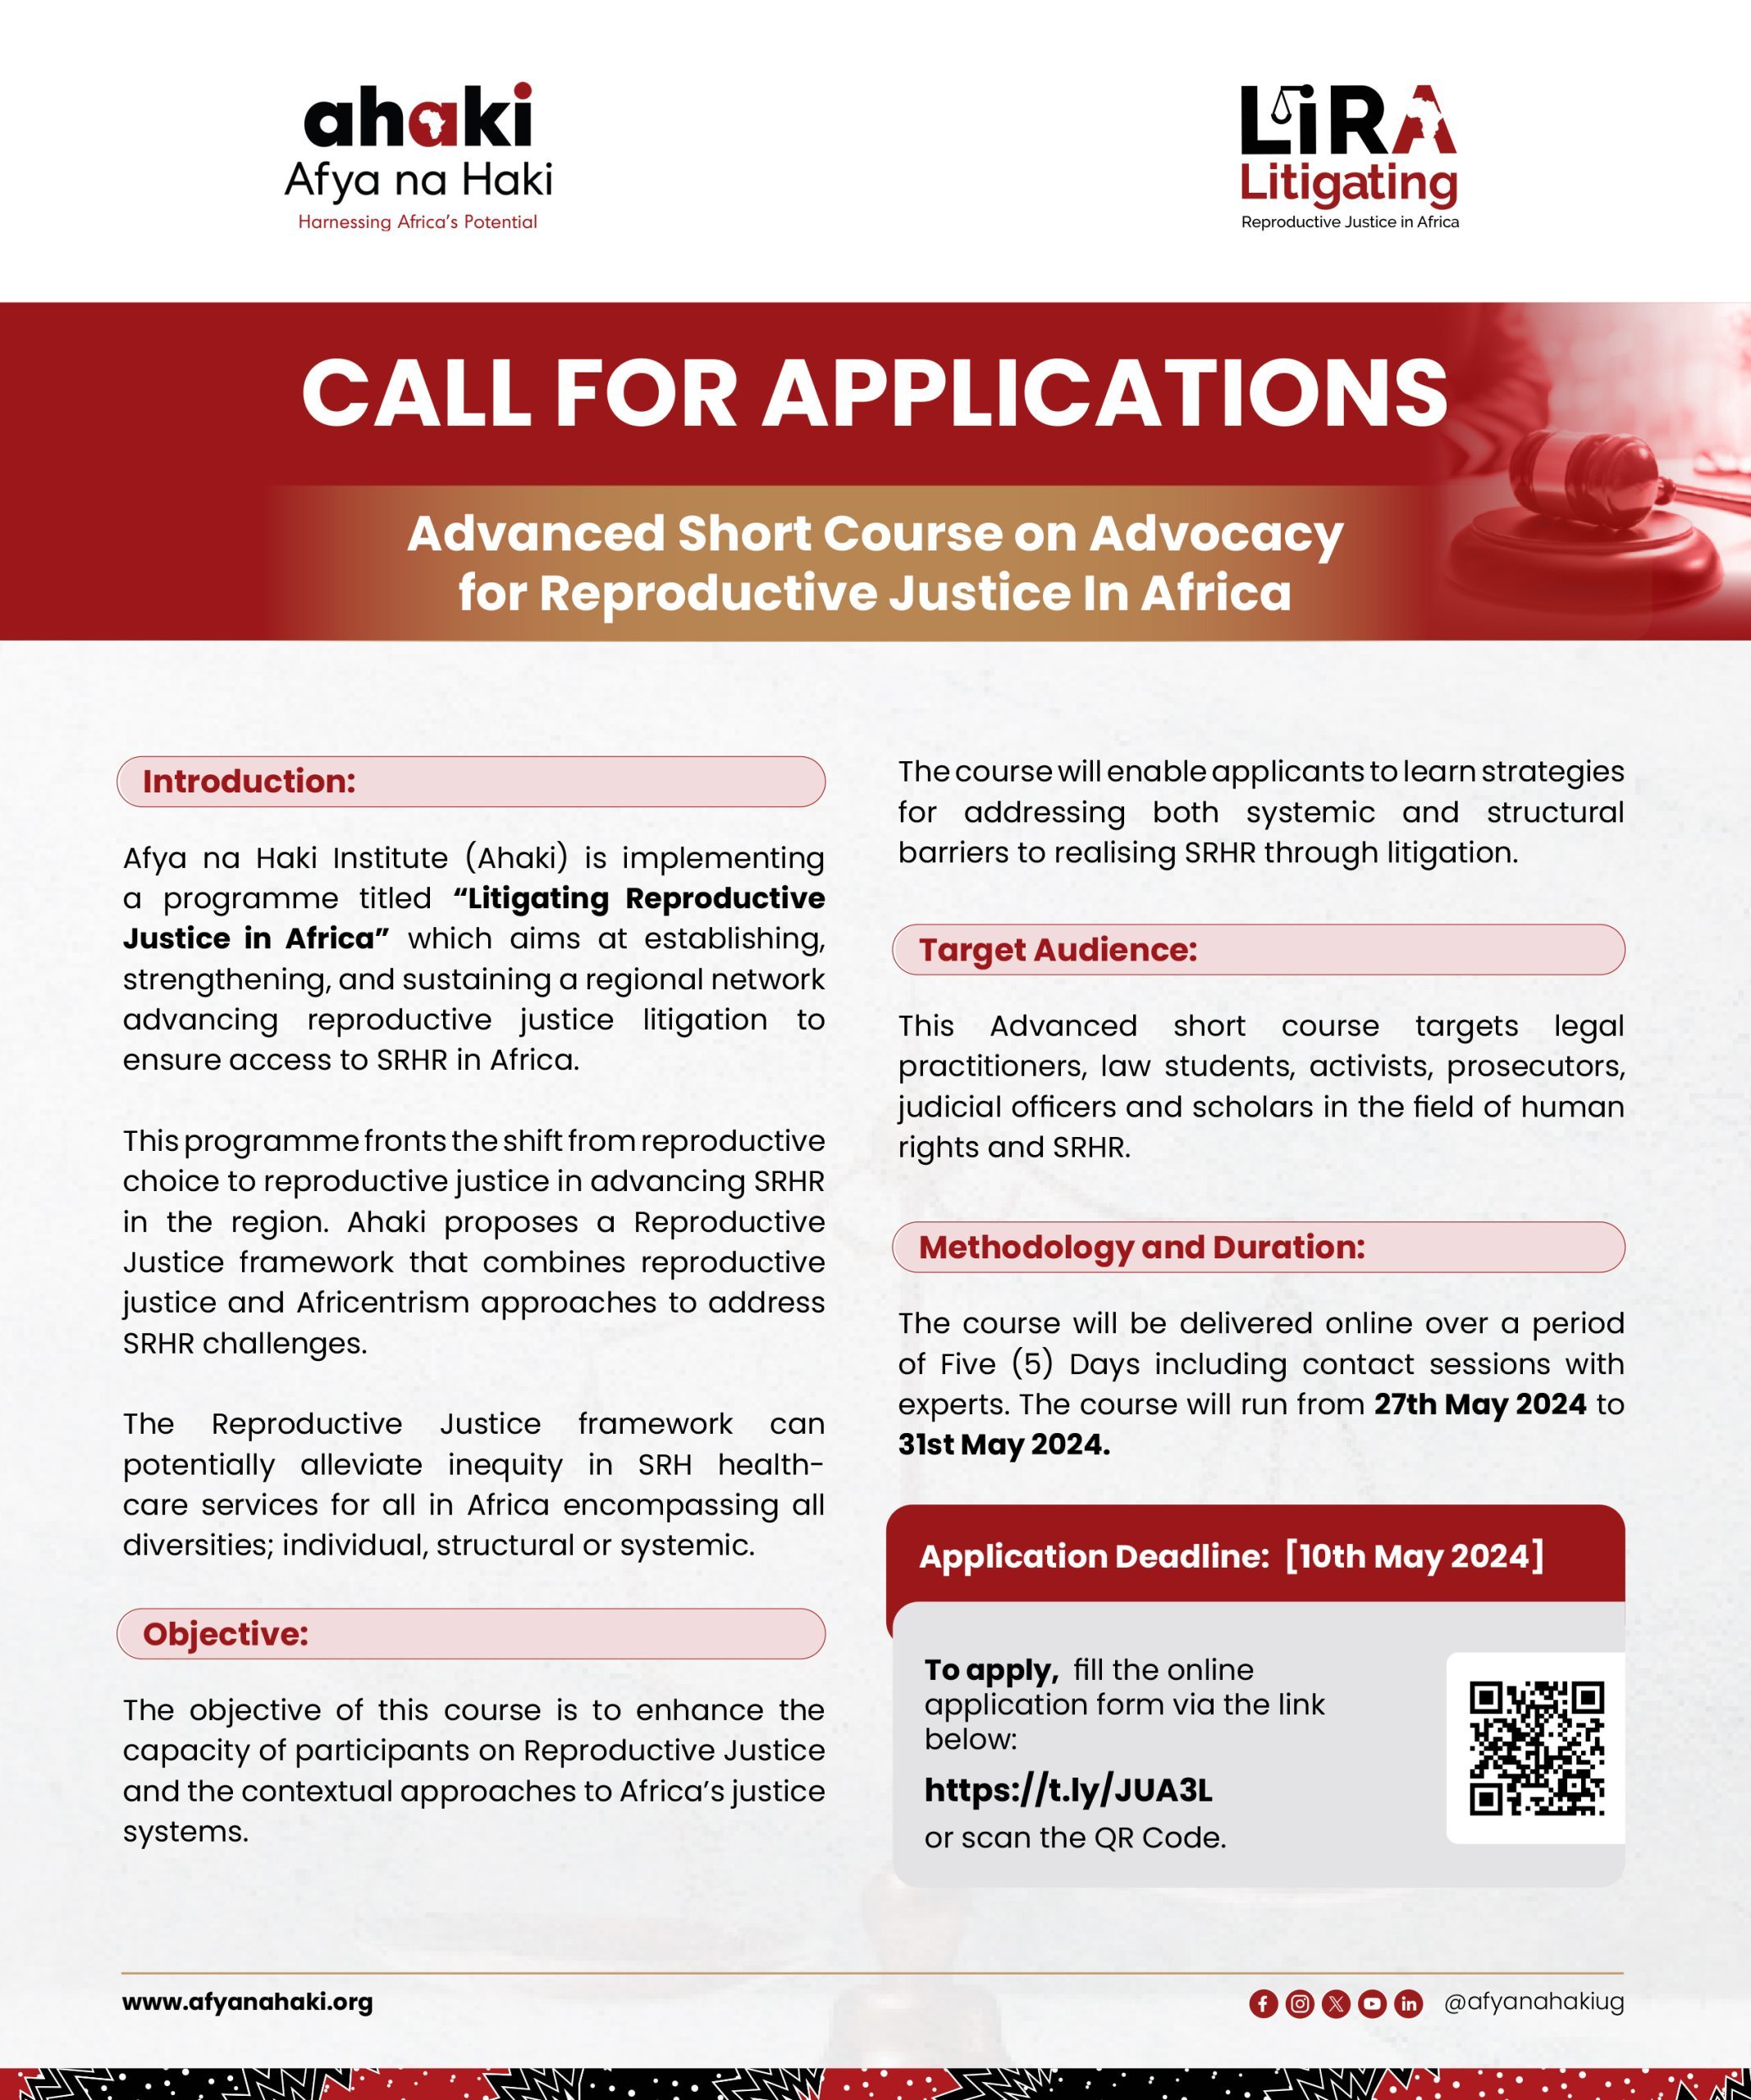 Eng_CALL-FOR-APPLICANTS-ADVANCED-SHORT-COURSE-ON-REPRODUCTIVE-JUSTICE-IN-AFRICA-5th-cohort-2